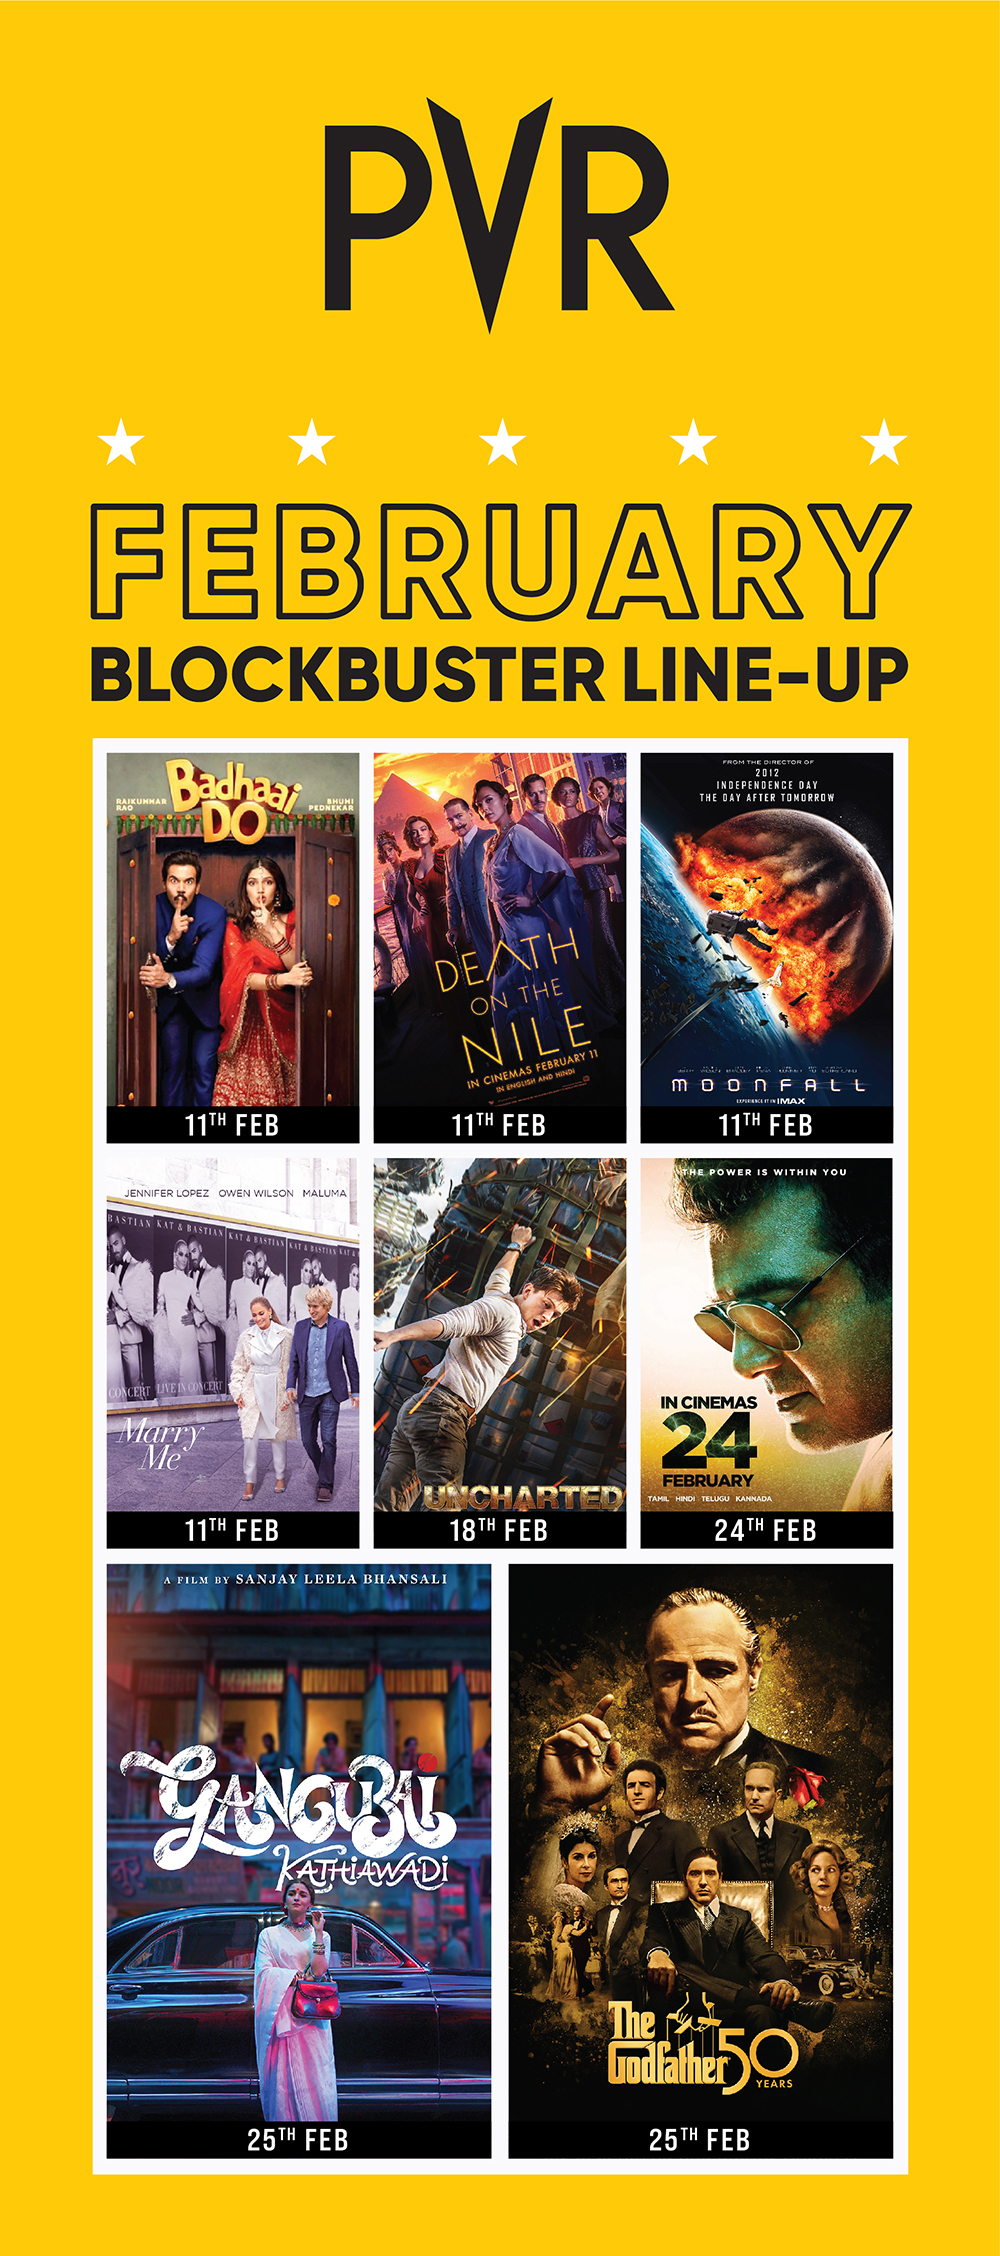 PVR announces the February blockbuster movie month with an